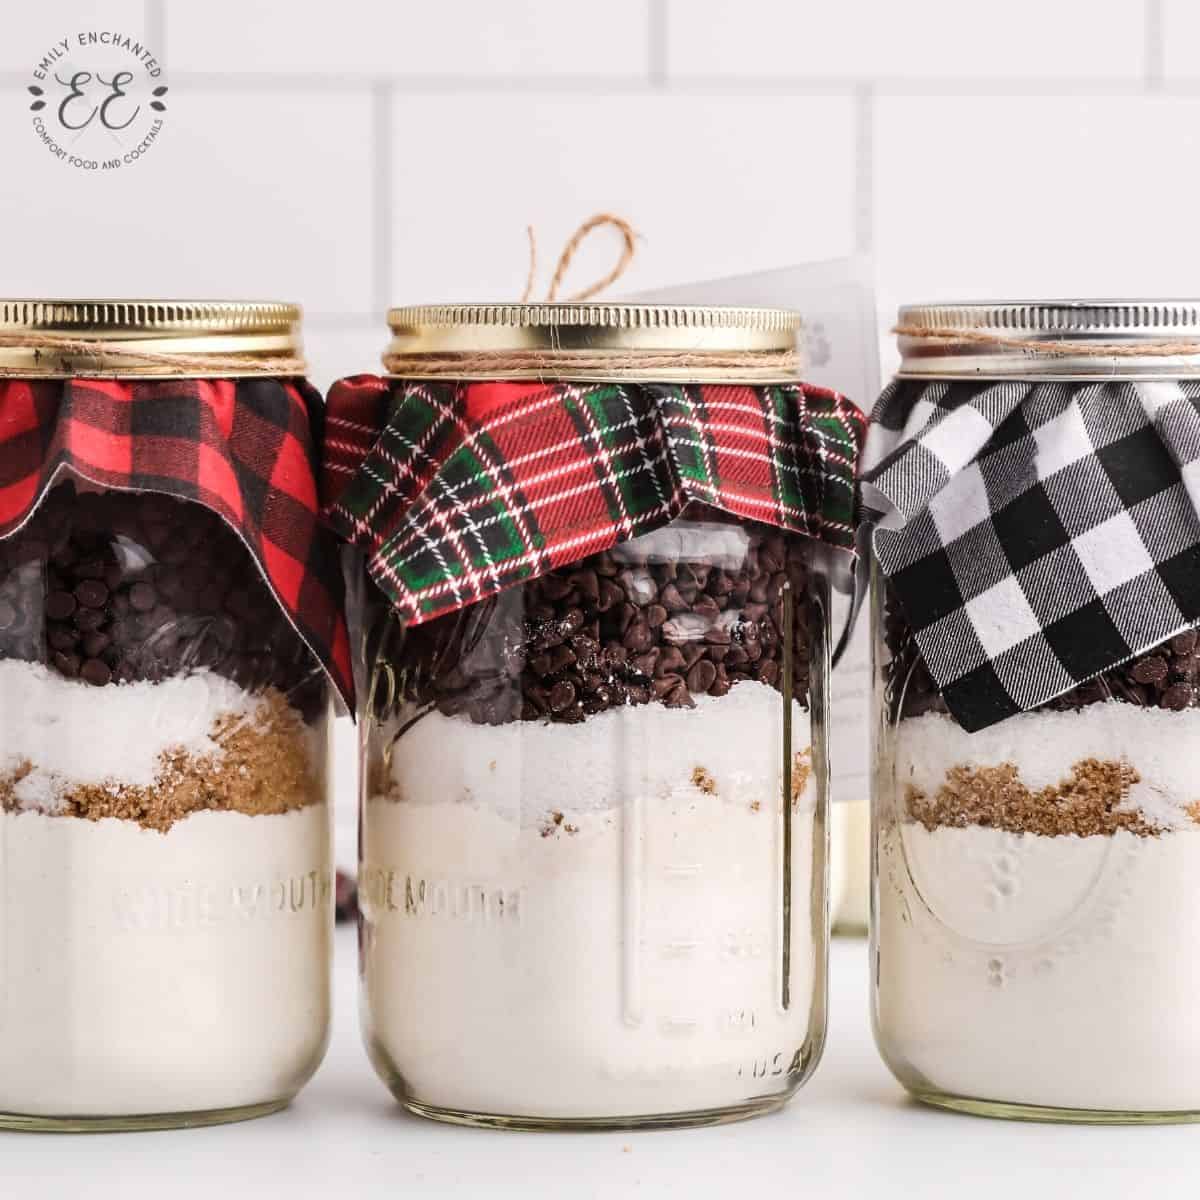 Christmas Cookie Mix in a Jar